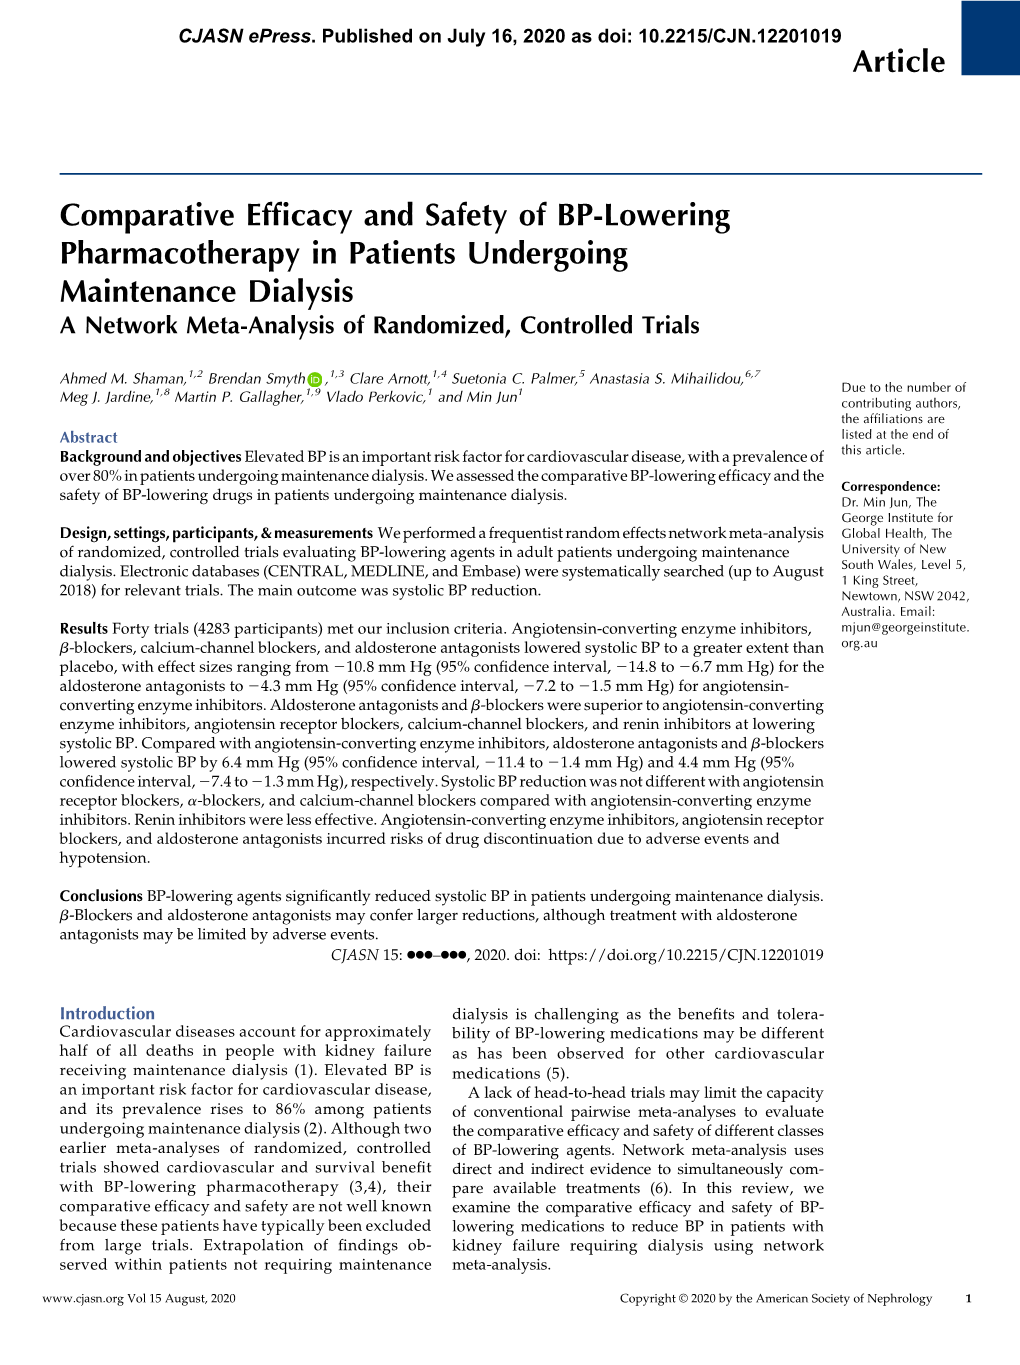 Comparative Efficacy and Safety of BP-Lowering Pharmacotherapy In